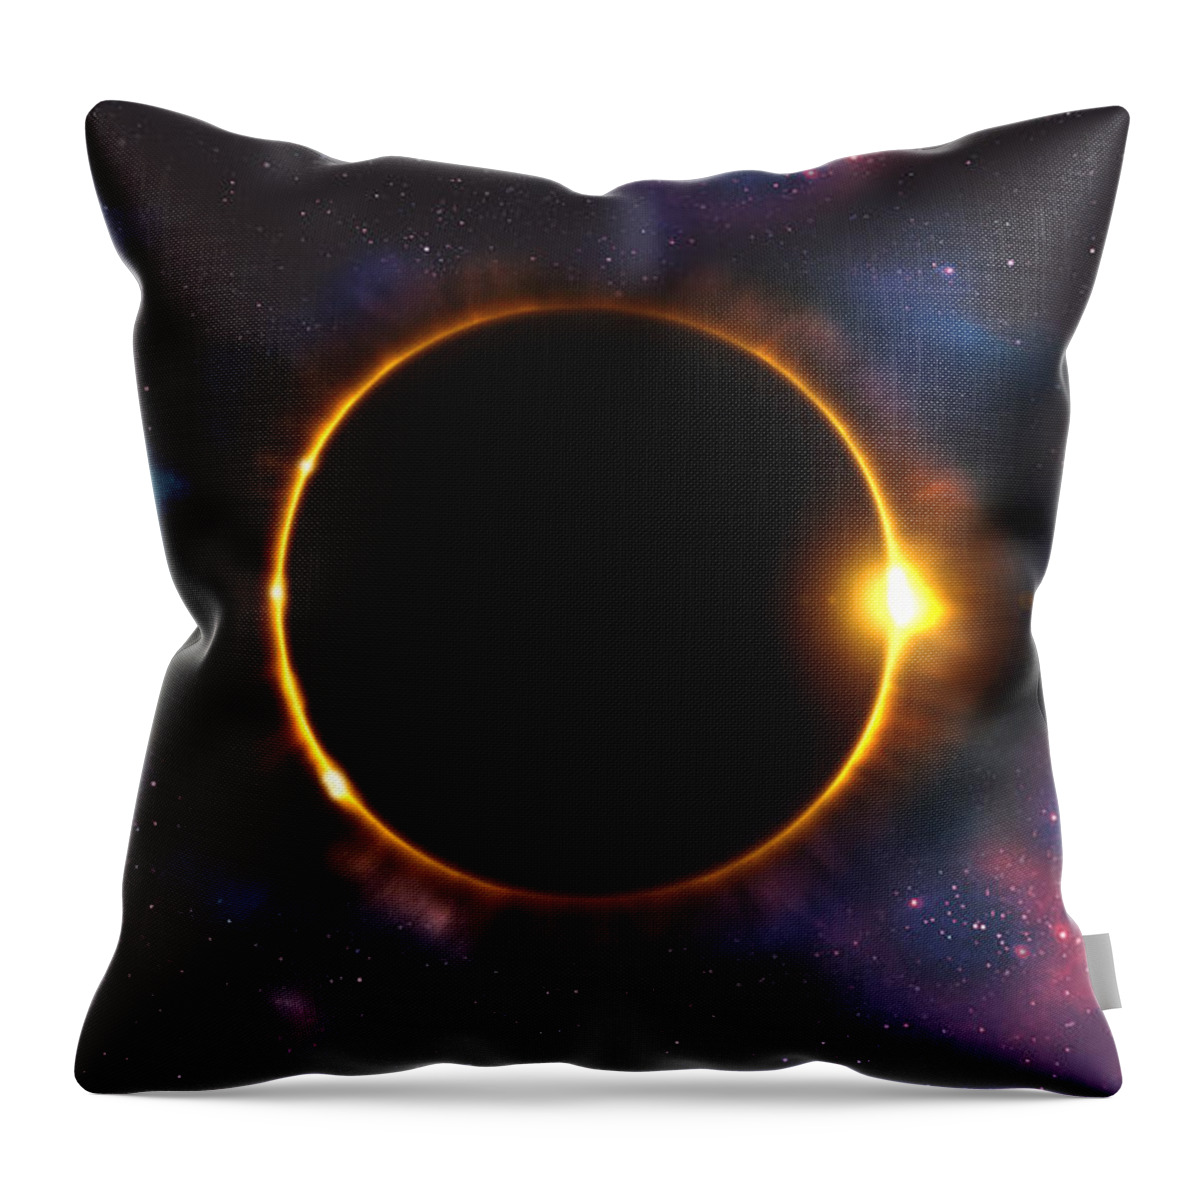 Eclipse Throw Pillow featuring the digital art Total Solar Eclipse In Space by Georgeta Blanaru